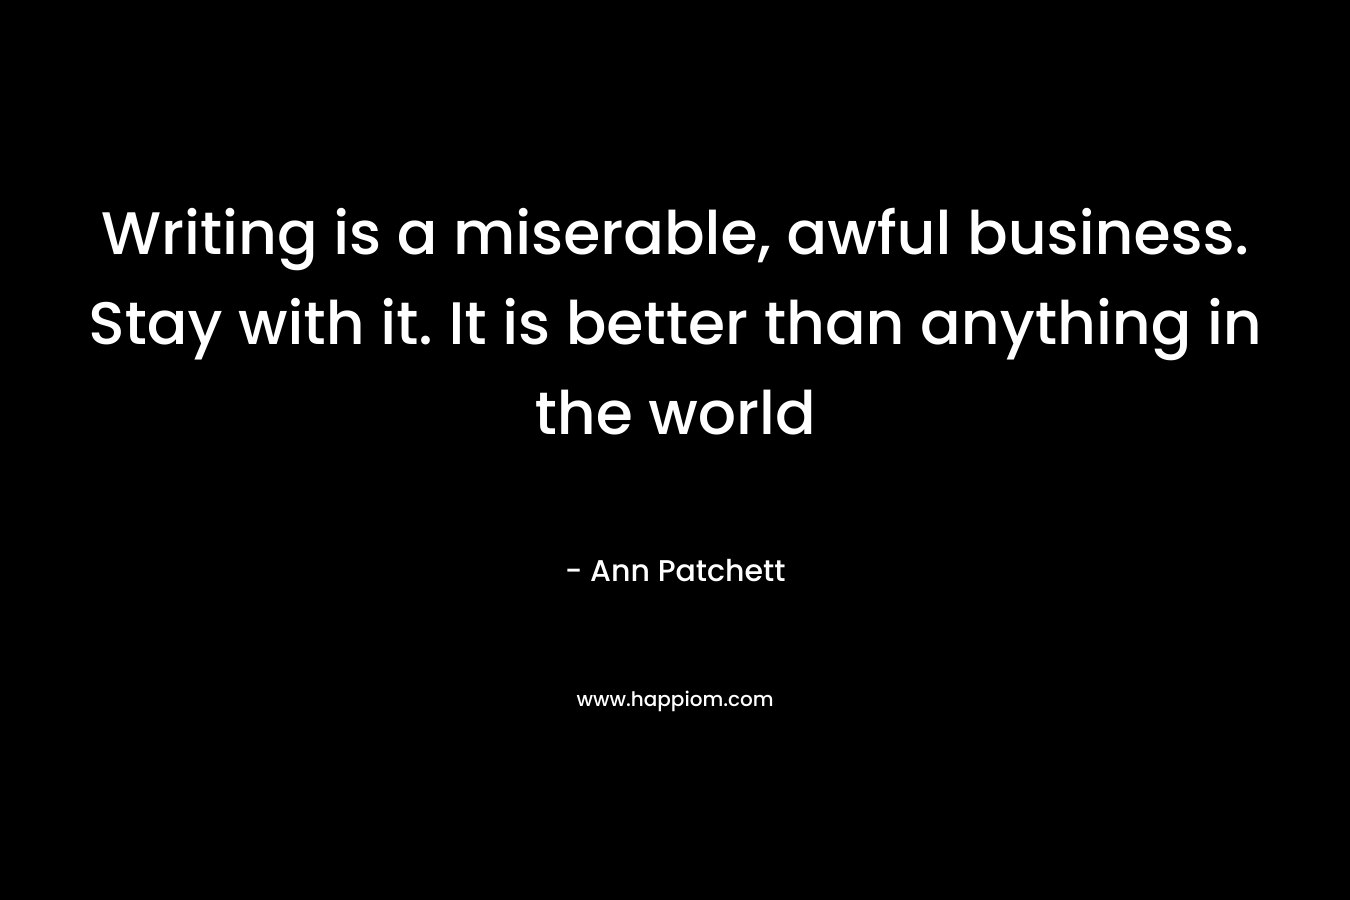 Writing is a miserable, awful business. Stay with it. It is better than anything in the world